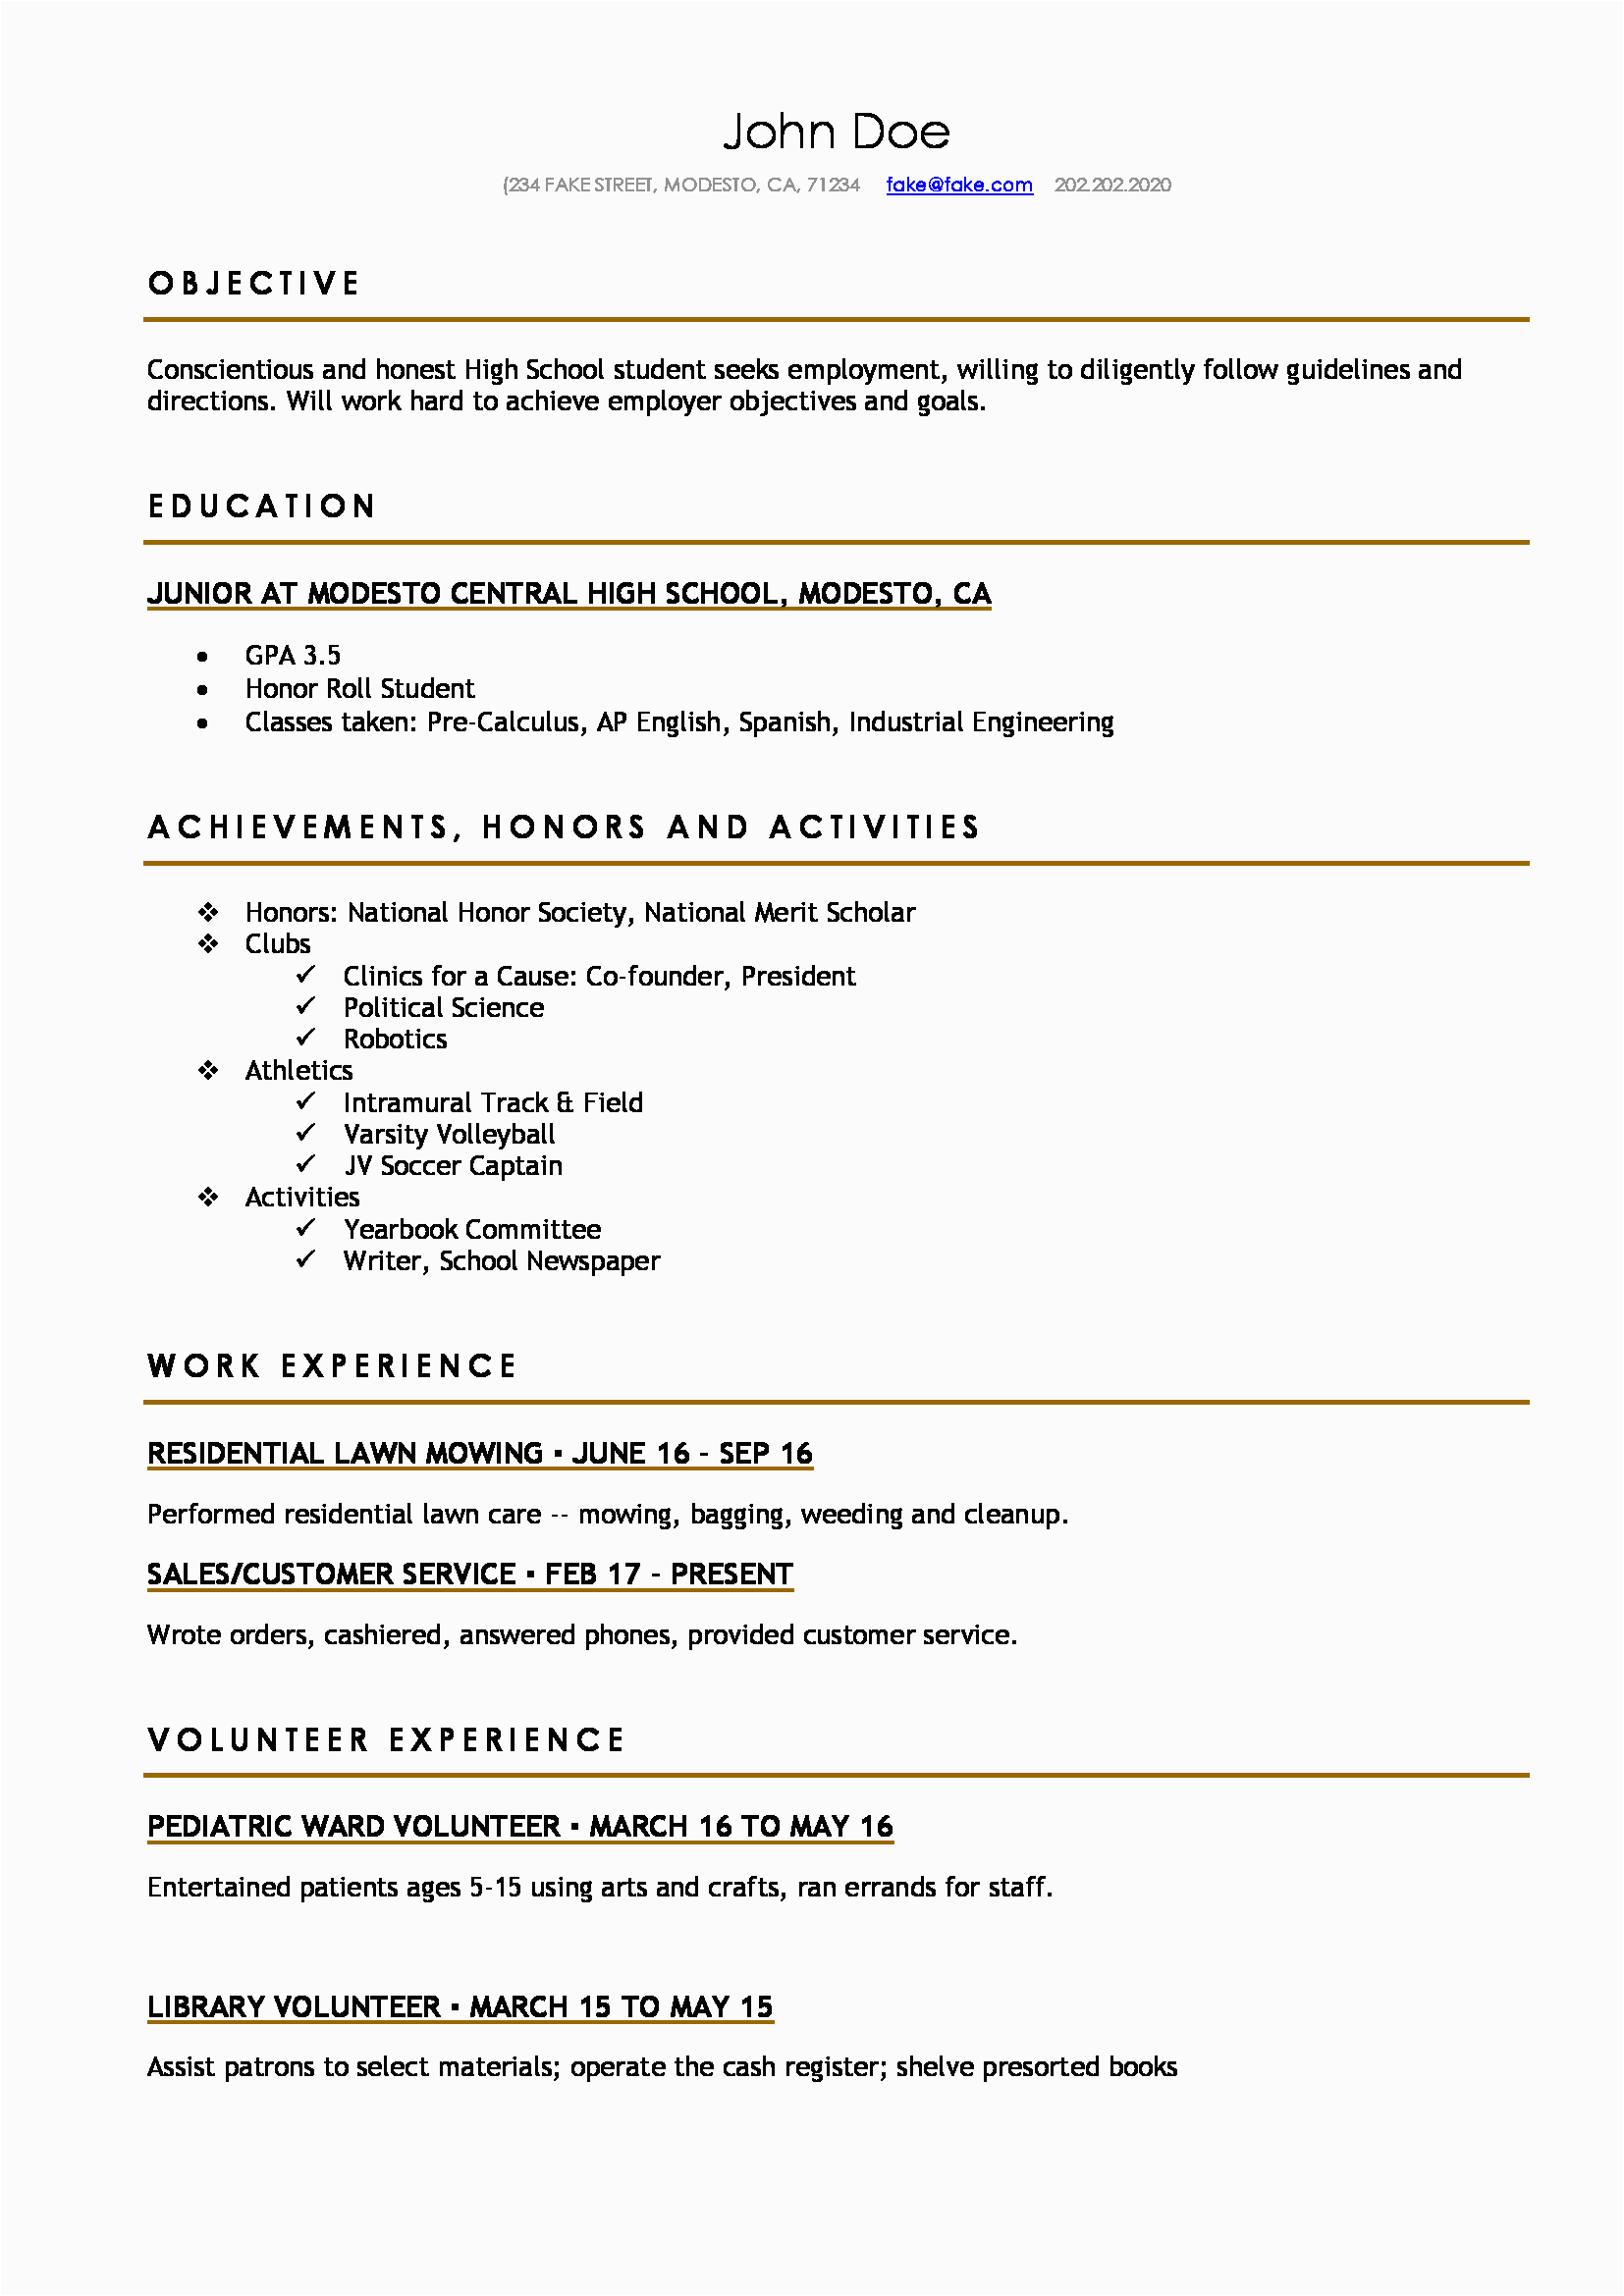 Sample First Resume for High School Student High School Resume Resume Templates for High School